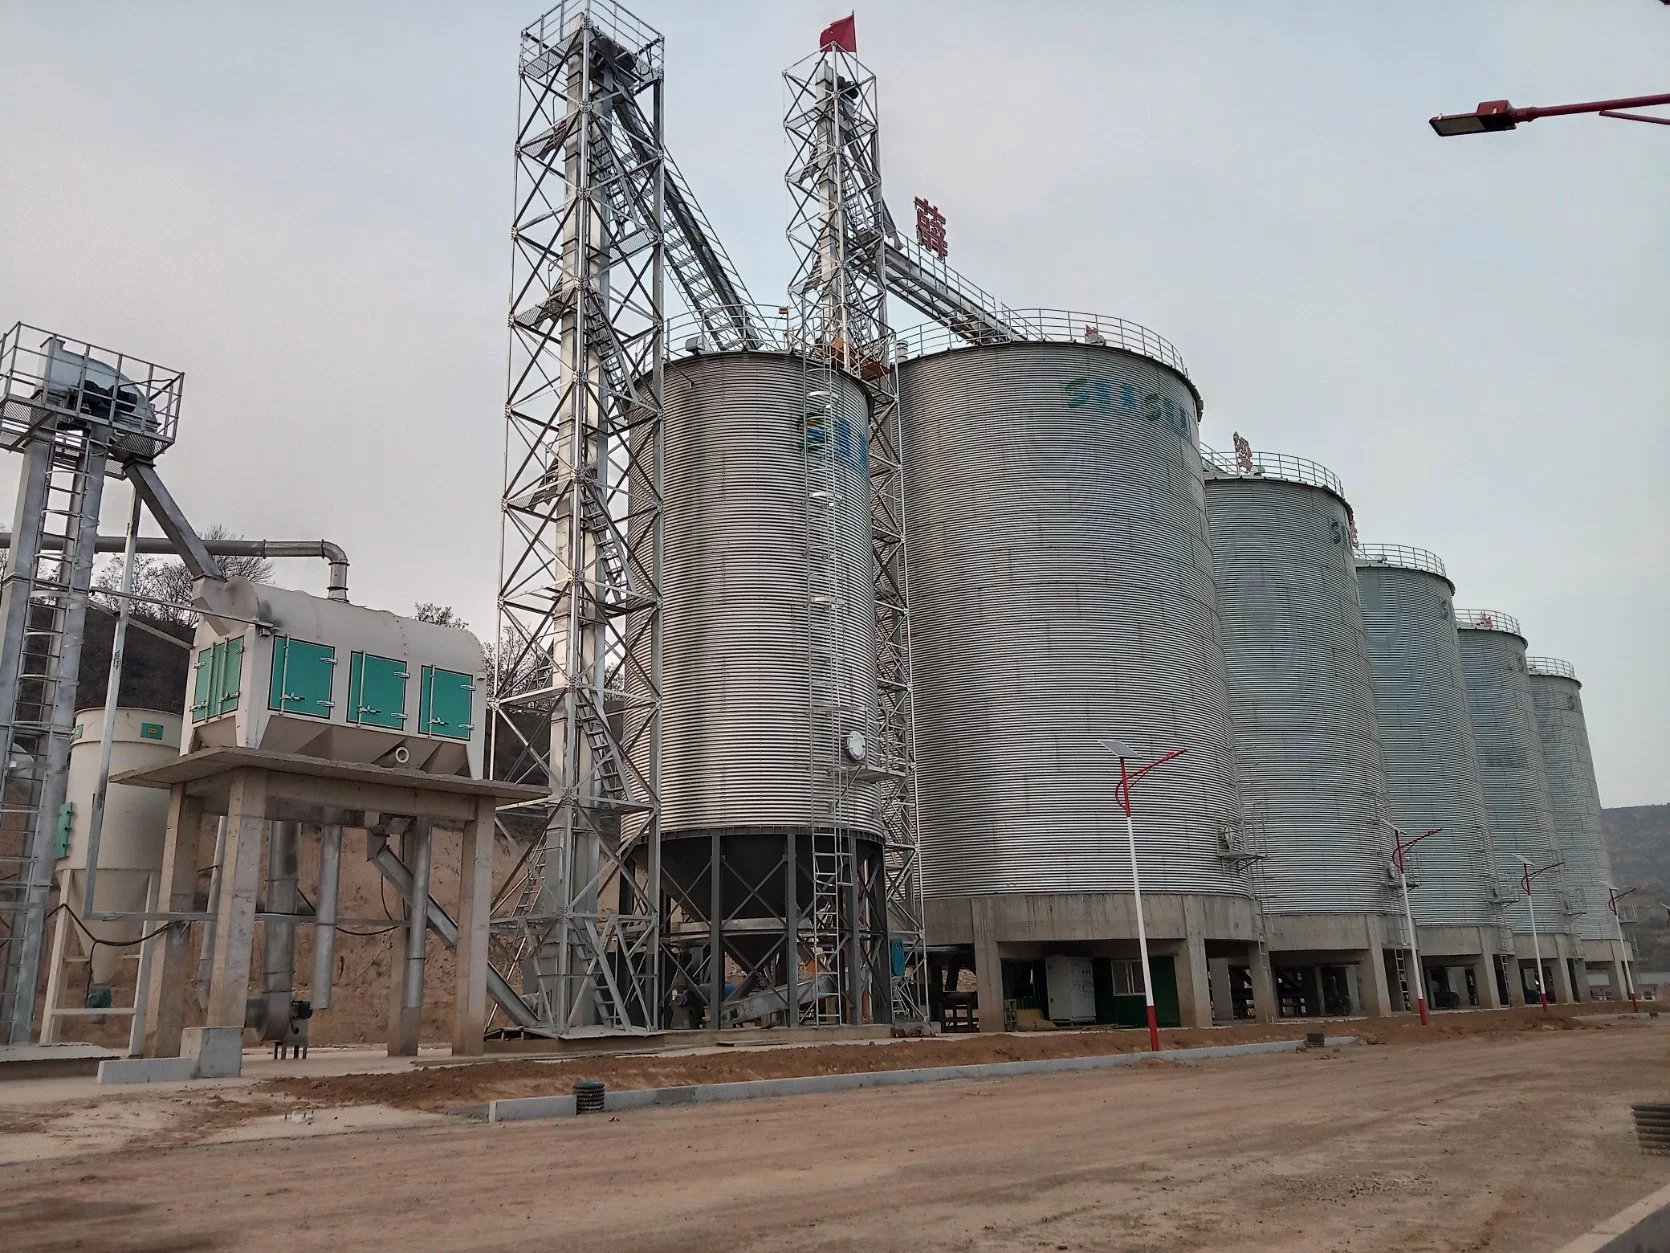 200 500 1000 5000 10000 20000 Tons Peanut Soybeans Meal Storage Silo Grain Storage Tank for Sale